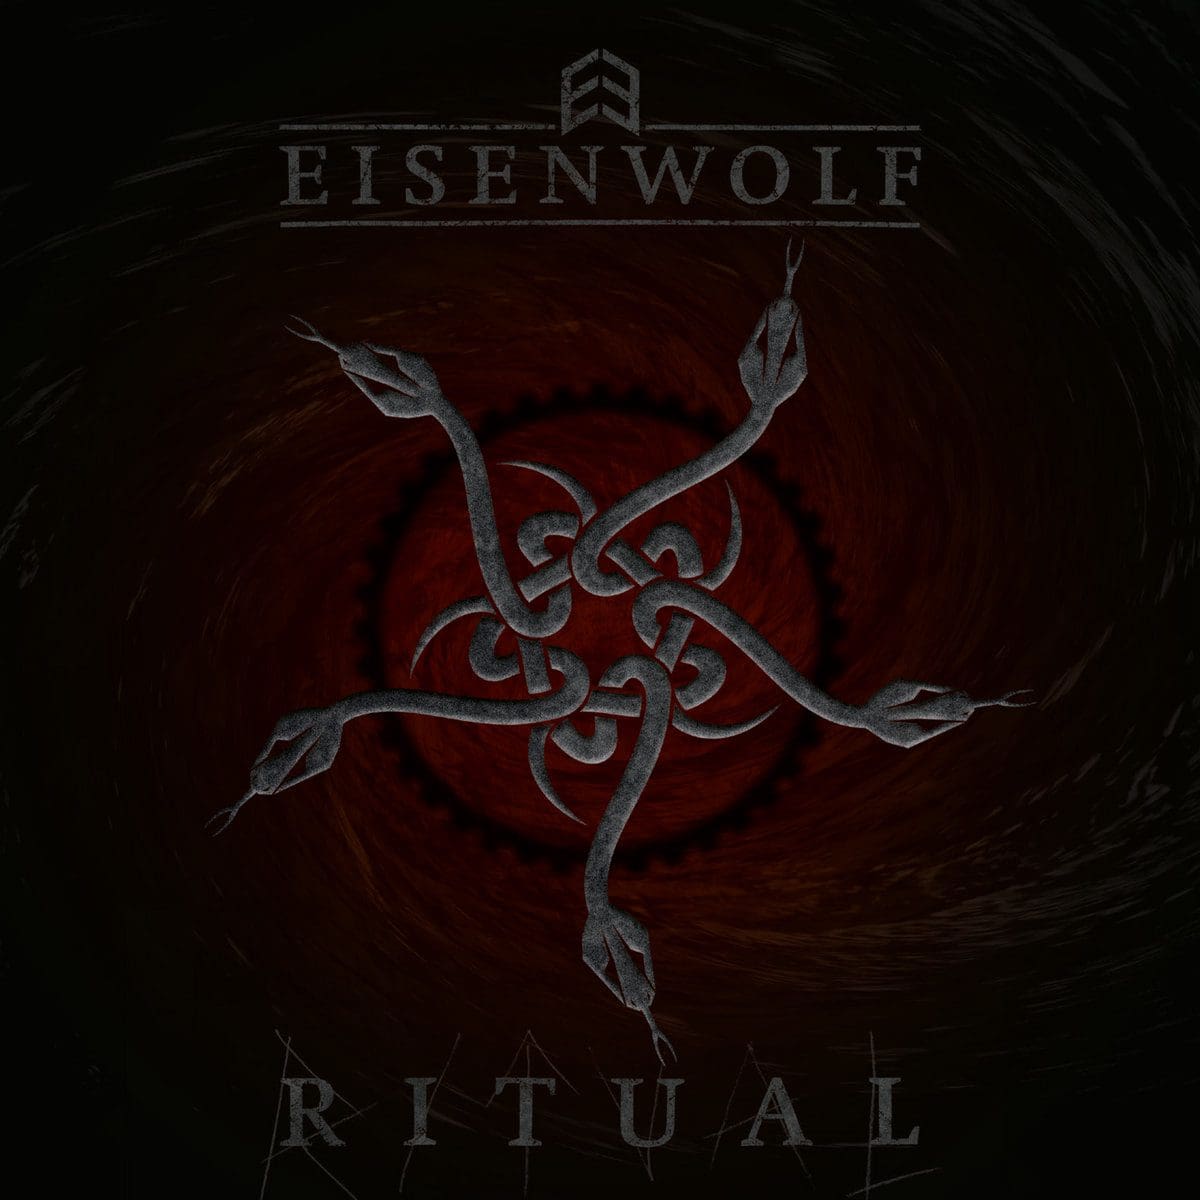 Black death industrial act Eisenwolf finally launches 'Ritual' debut album after number of digital only releases